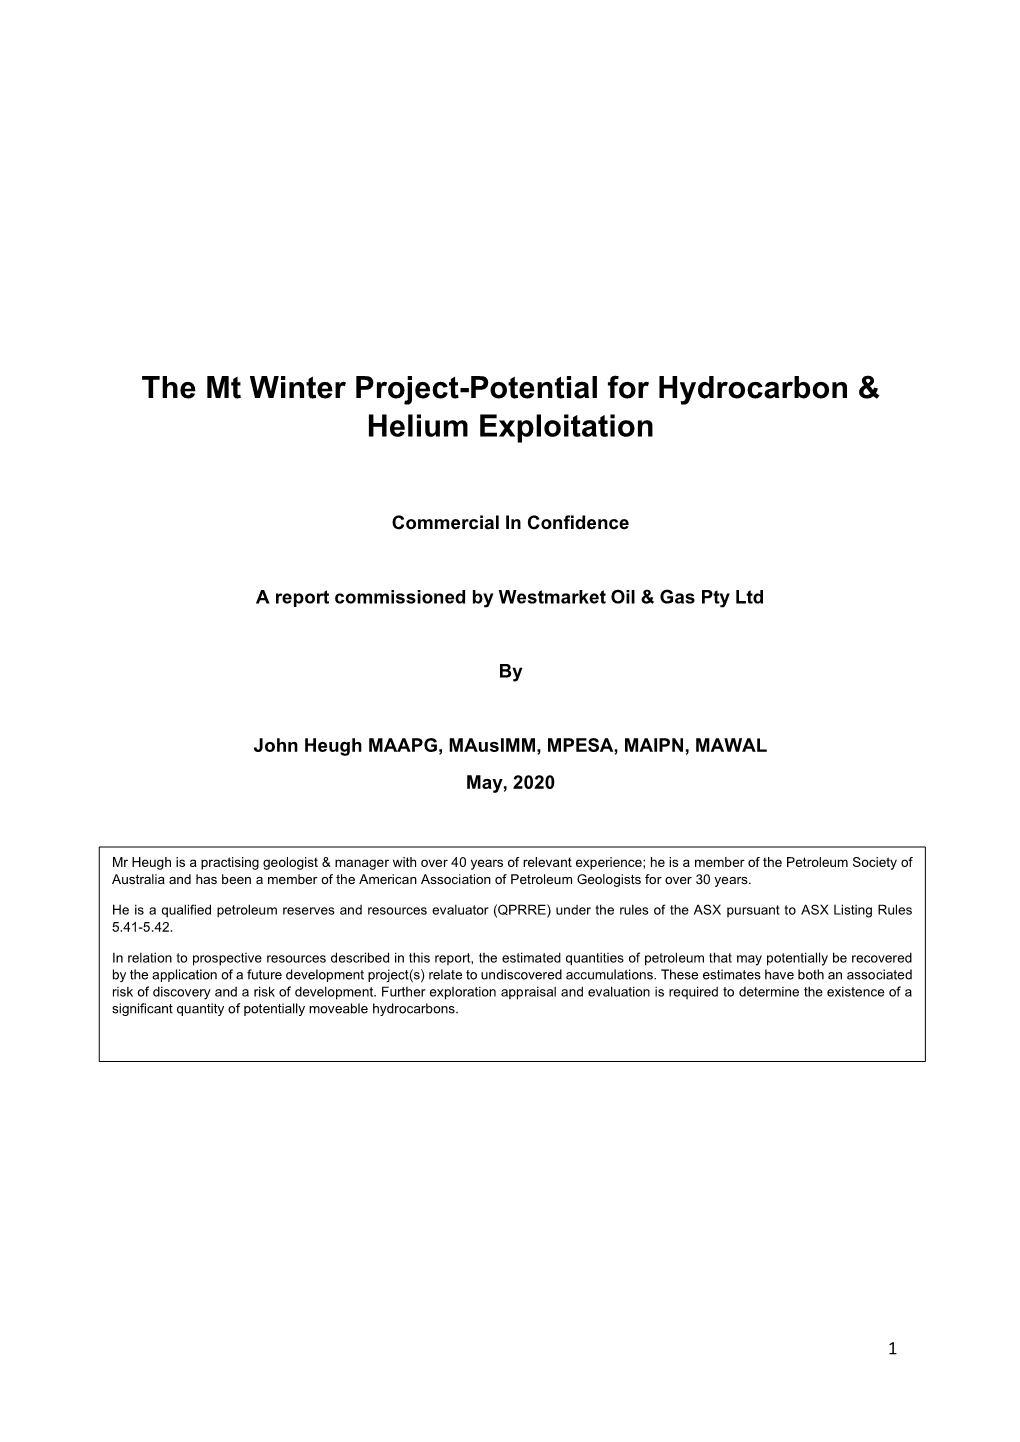 The Mt Winter Project-Potential for Hydrocarbon & Helium Exploitation